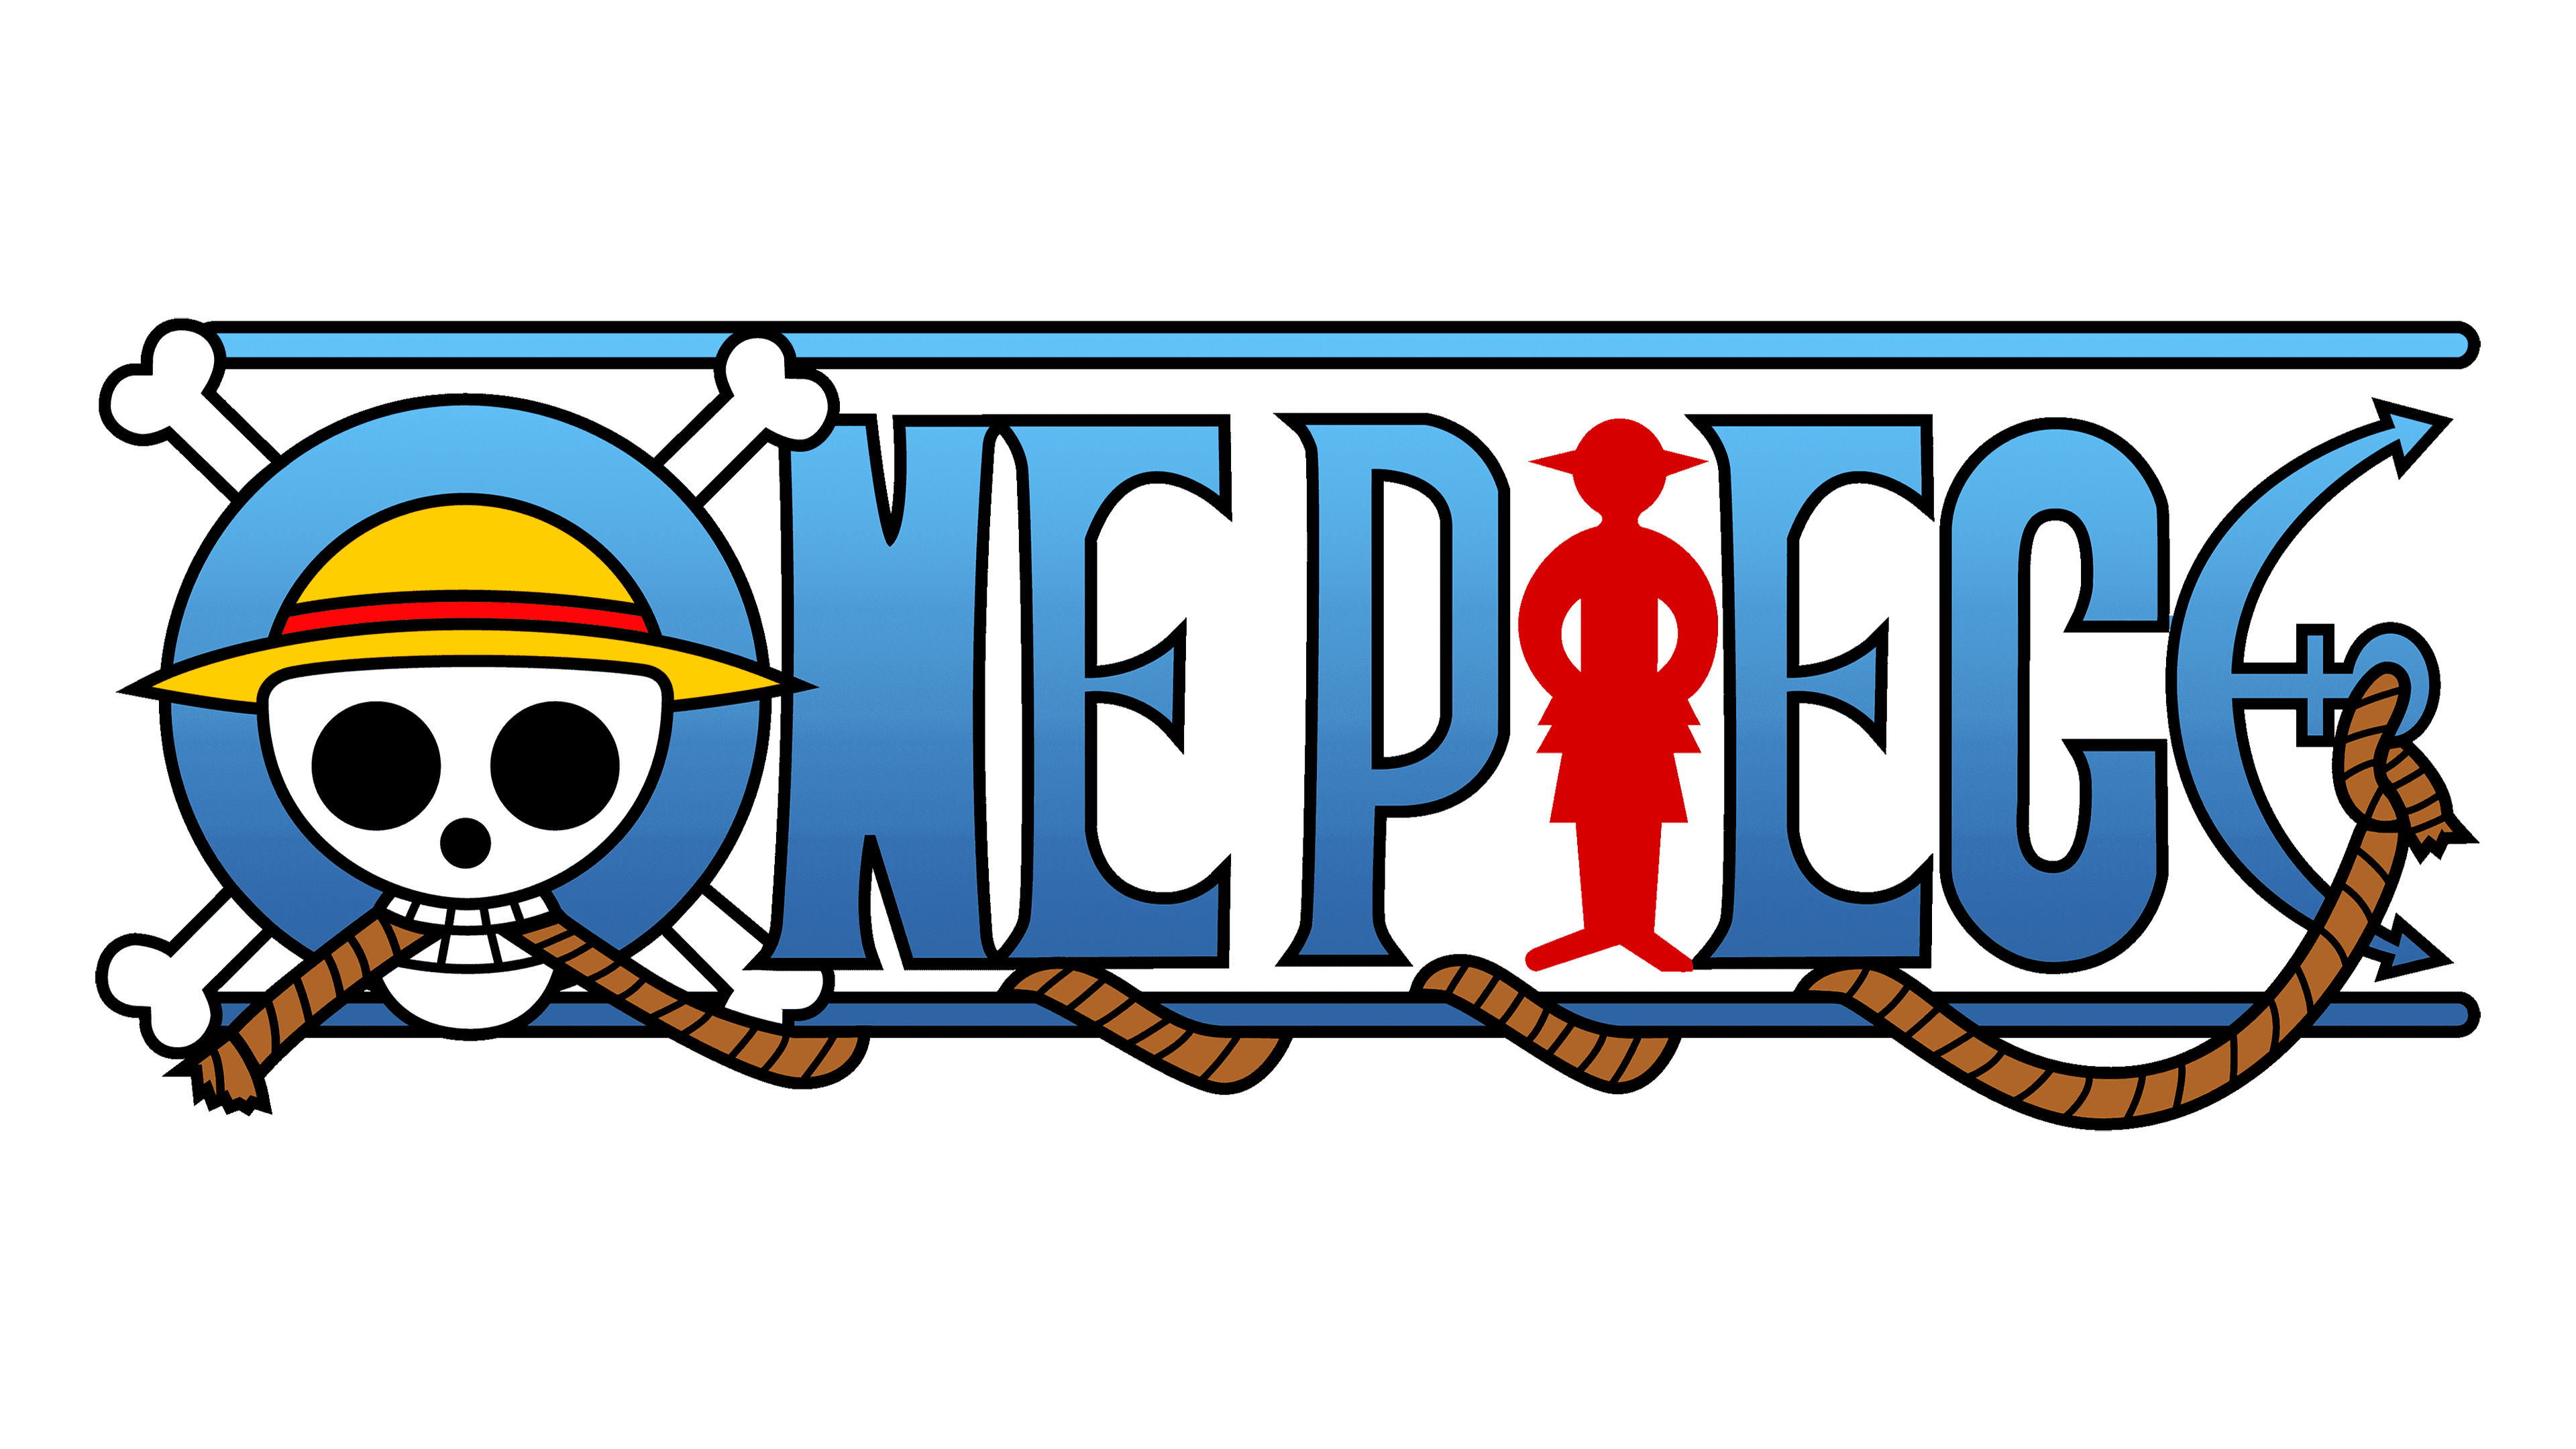 One-Piece-Logo.png